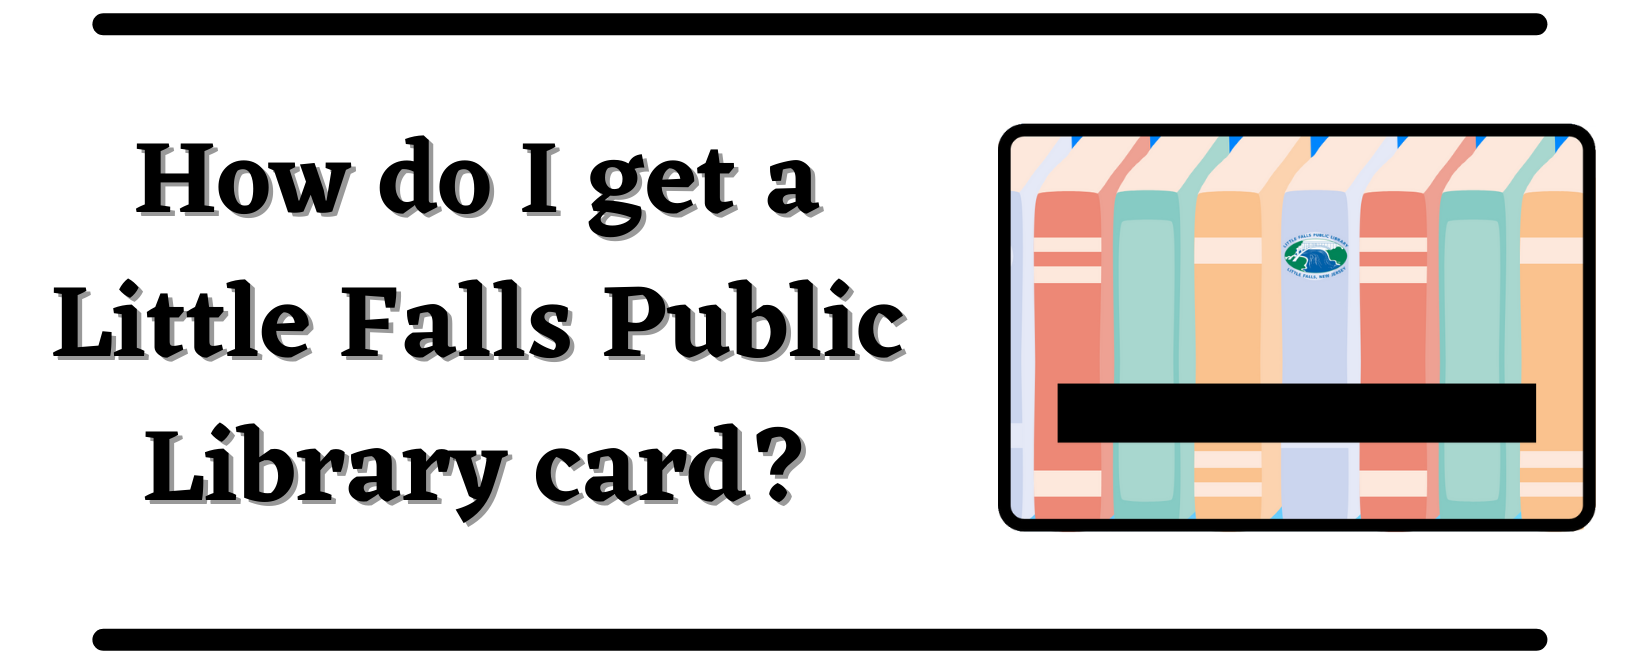 How do I get a Little Falls Library Card